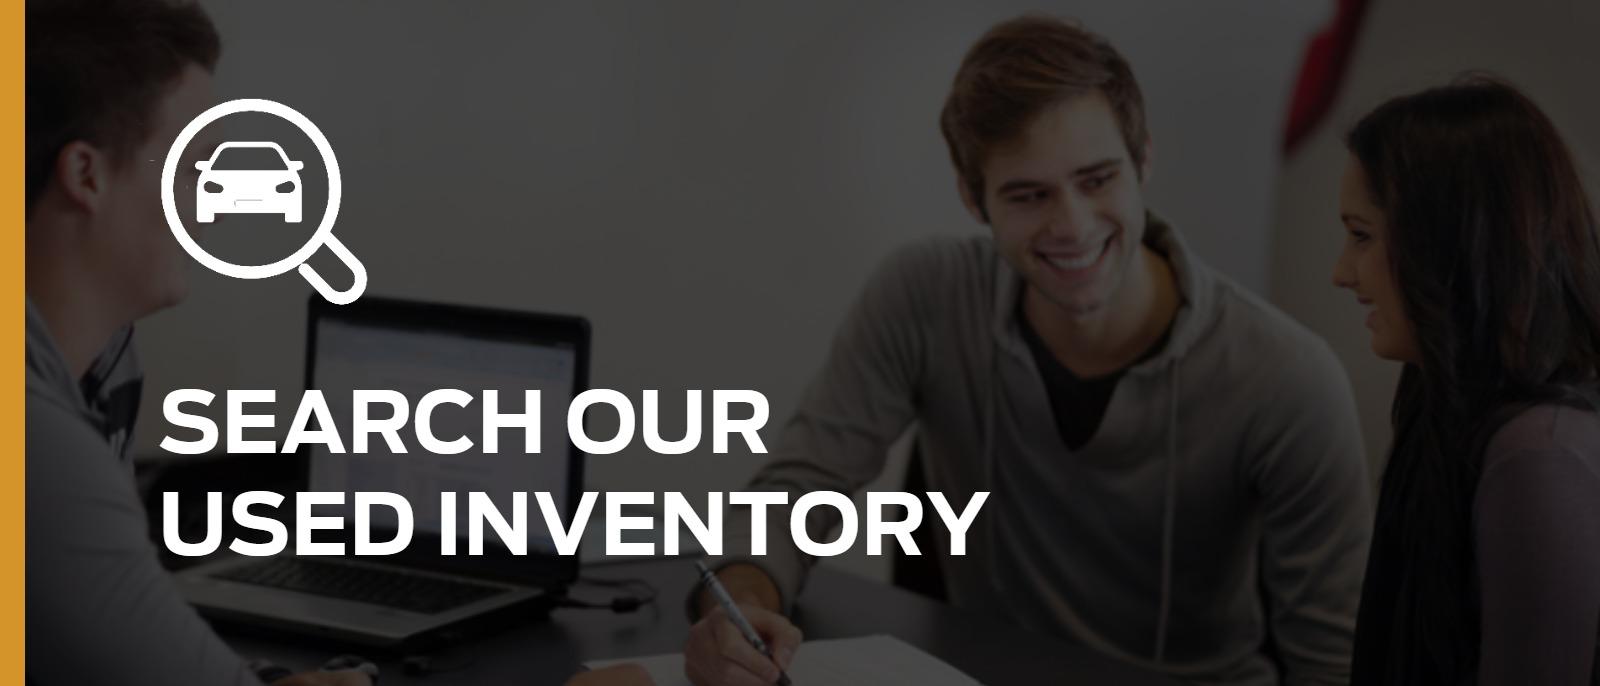 SEARCH OUR USED INVENTORY